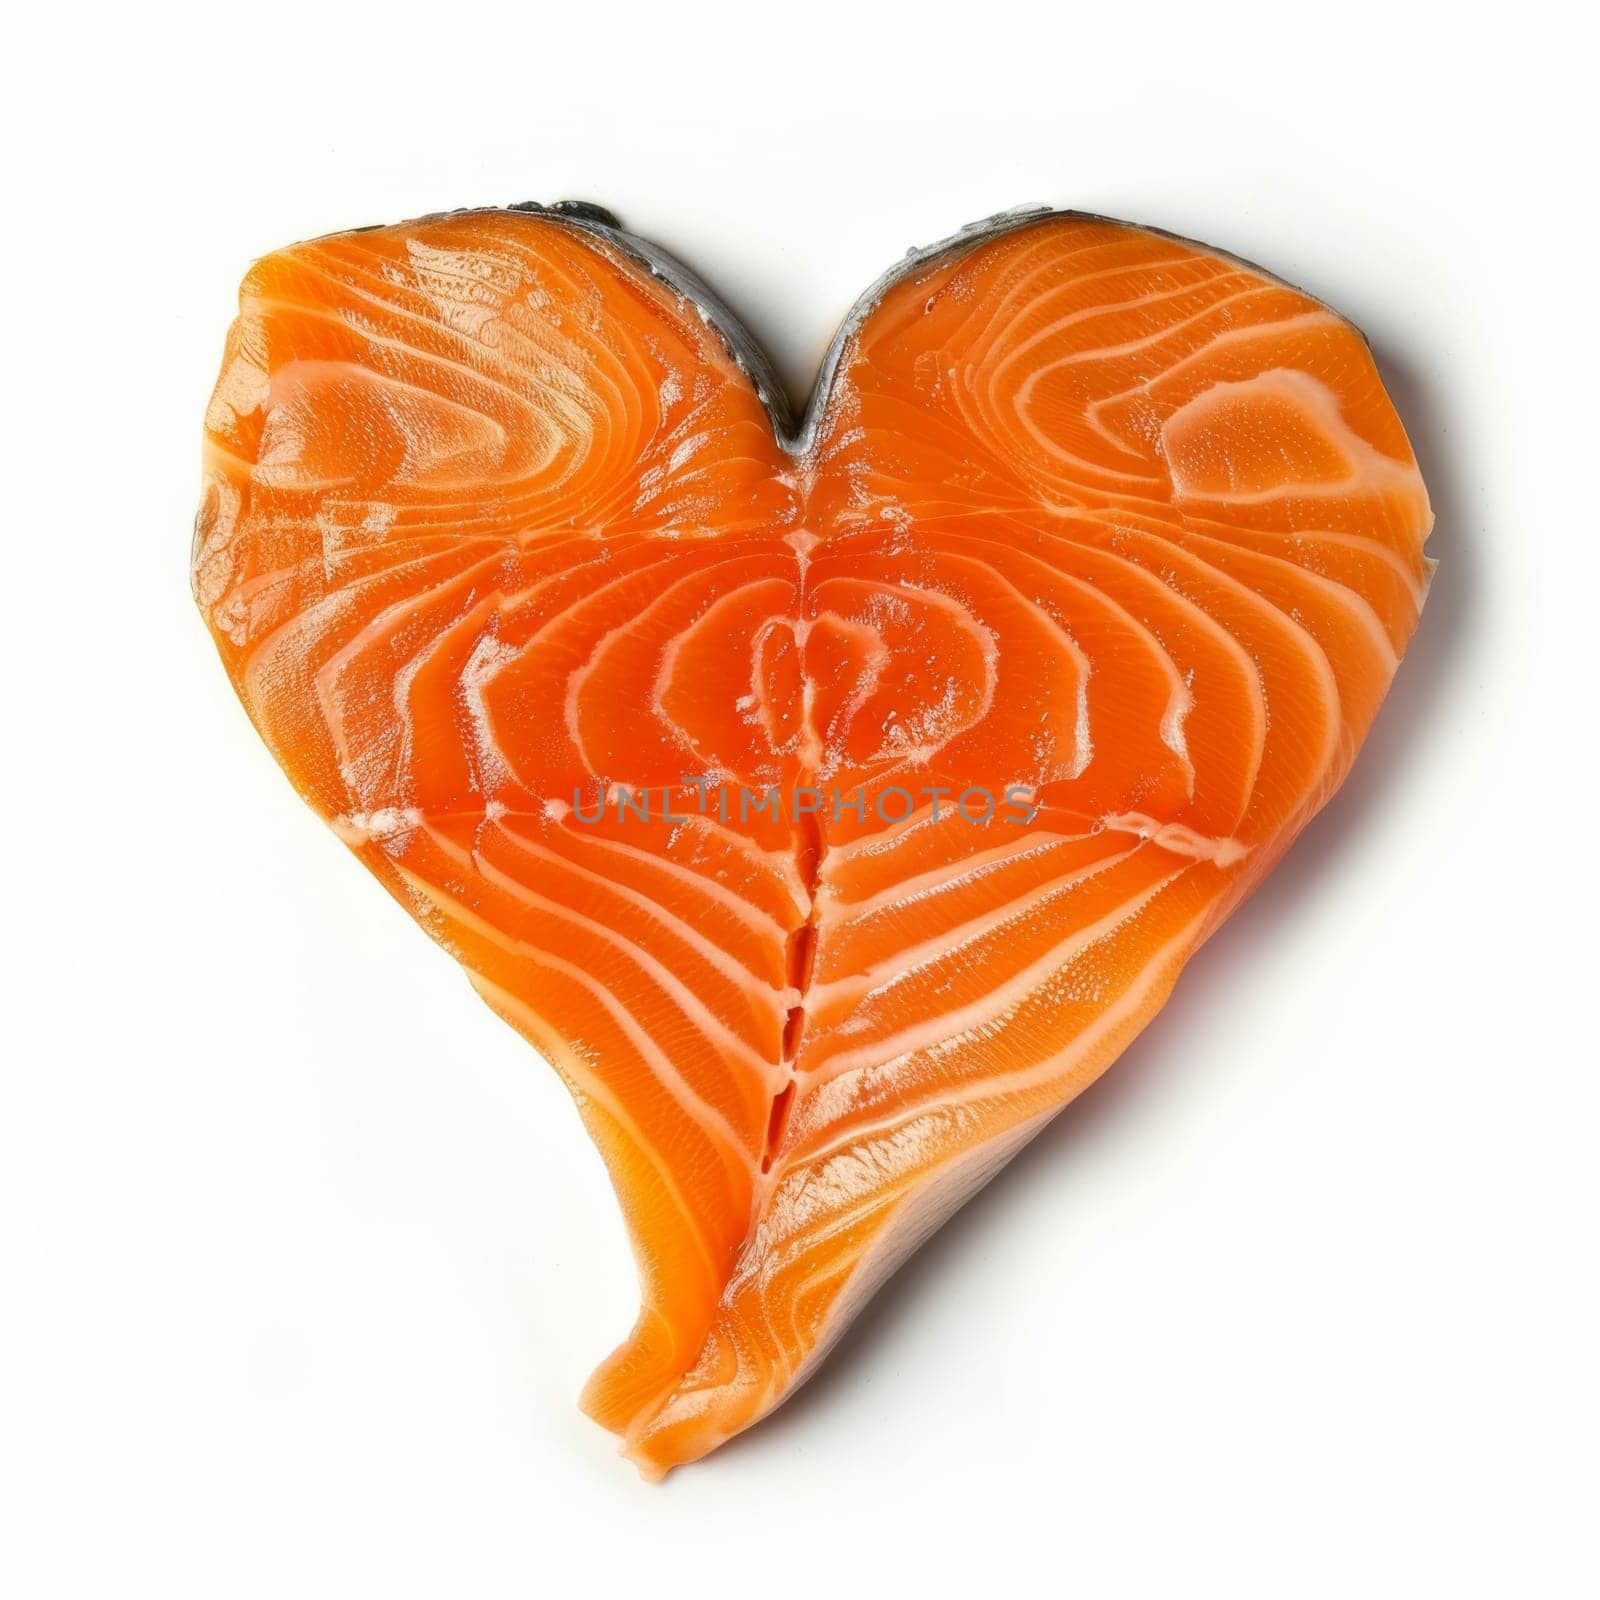 Top view of a slice of heart shaped salmon fillet isolated on white background by papatonic